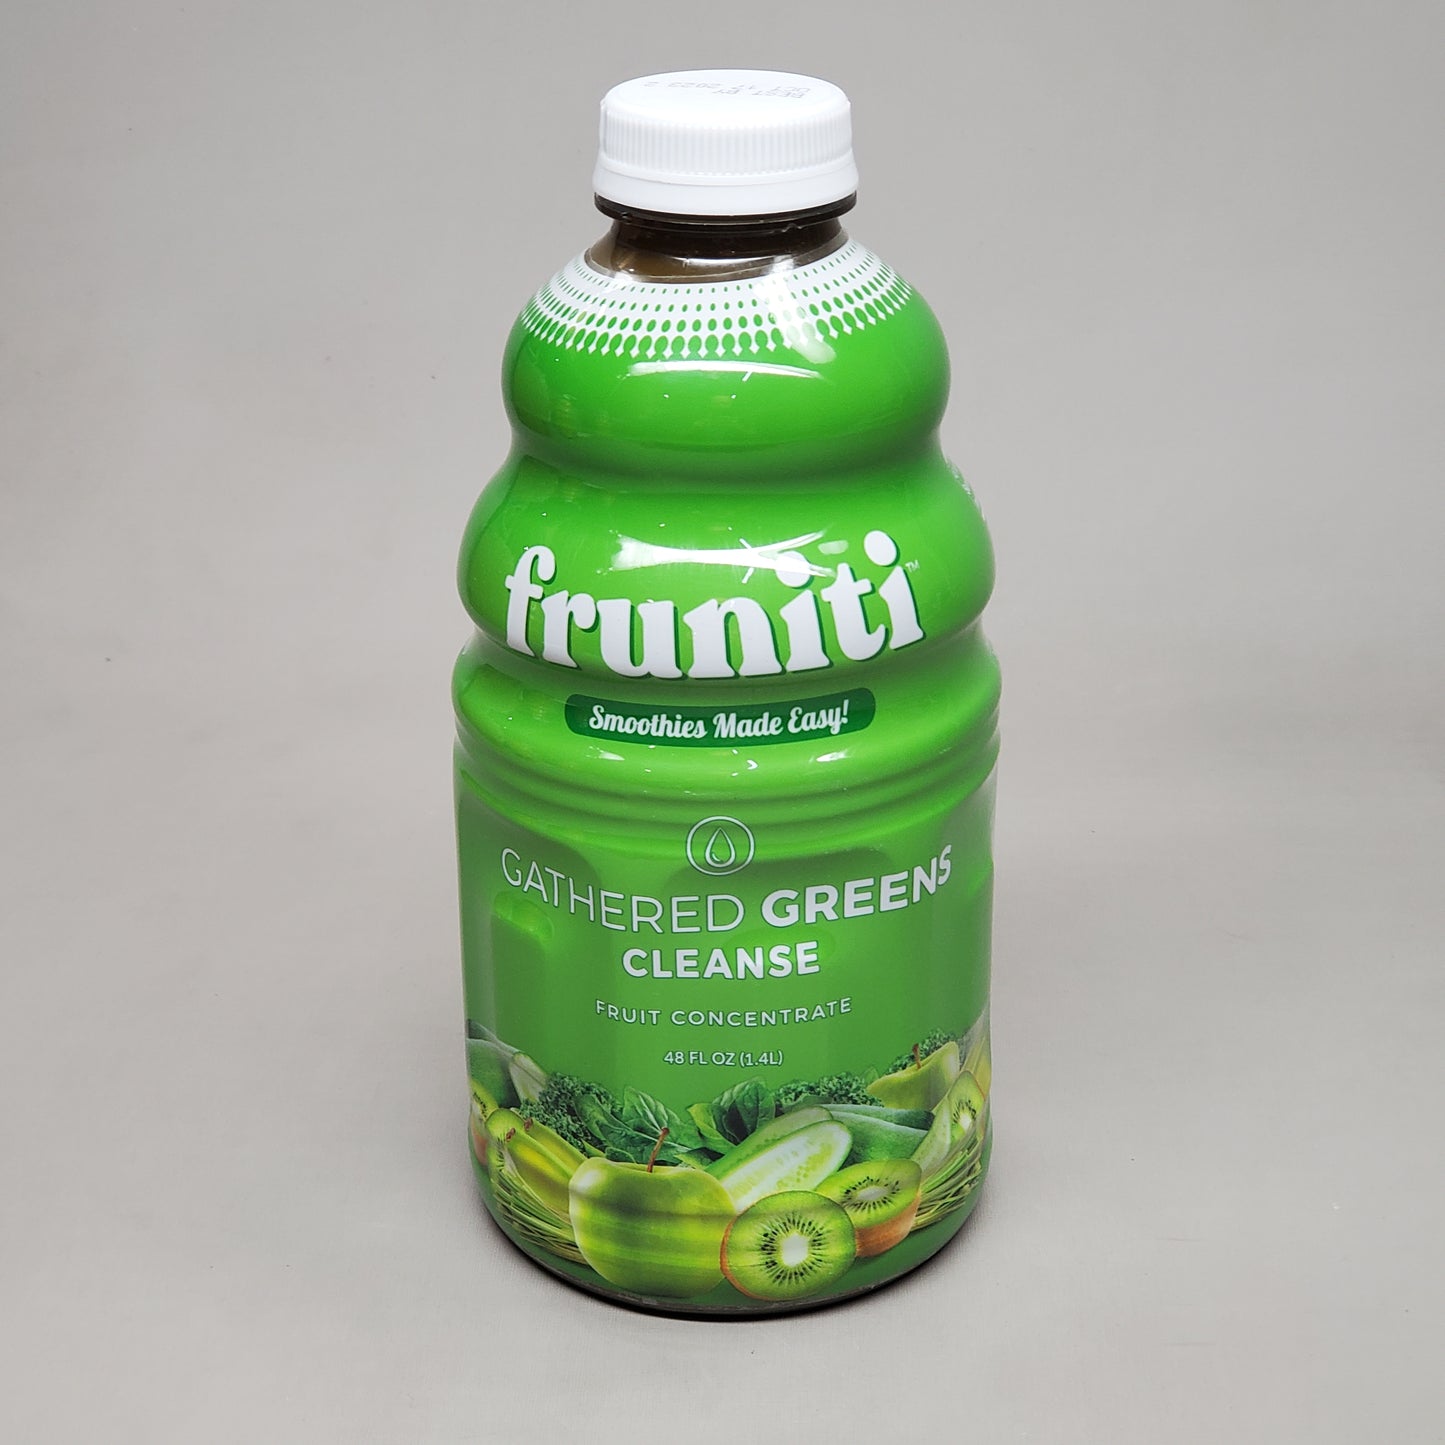 FRUNITI Gathered Greens Cleans 48 fl oz Fruit Concentrate Smoothies Made Easy (10/23)